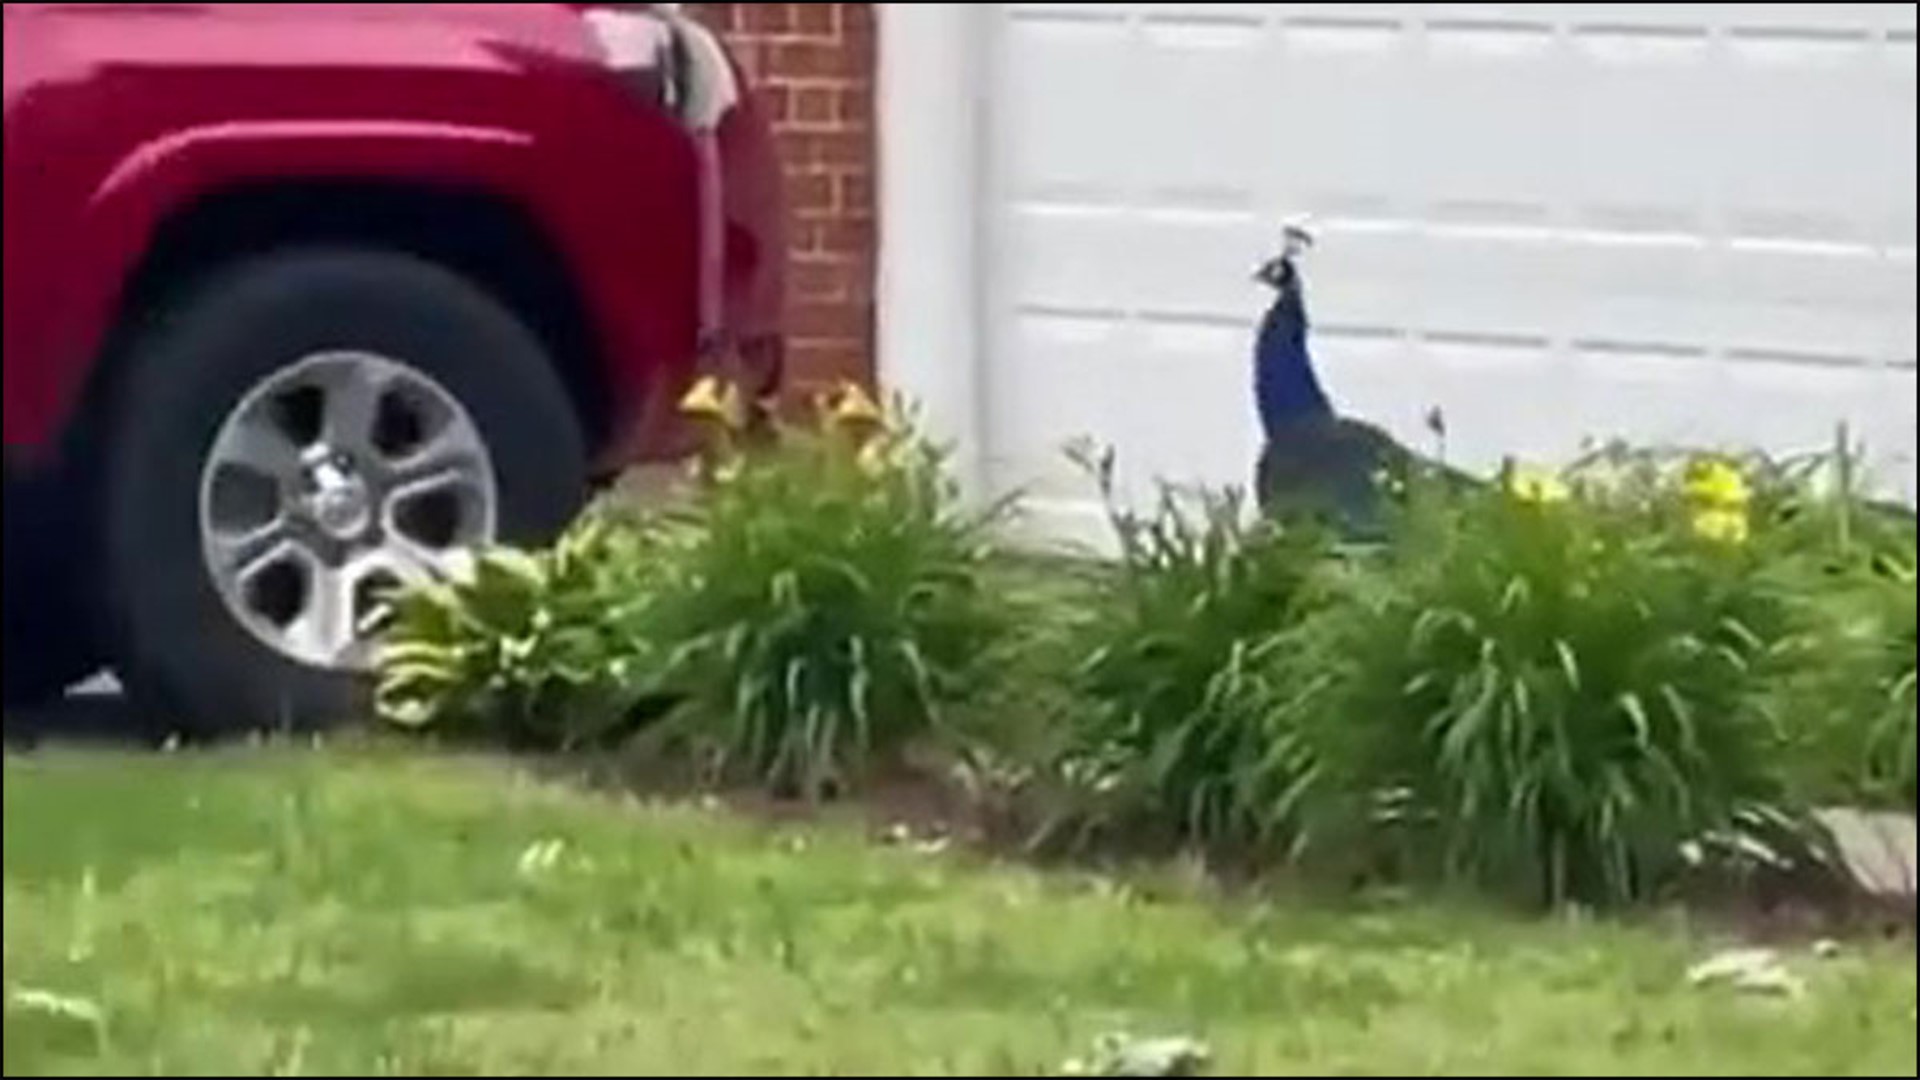 Someone spotted a peacock roaming around the River Walk subdivision in Chesapeake. He seemed to be enjoying his time walking outside of a home there.